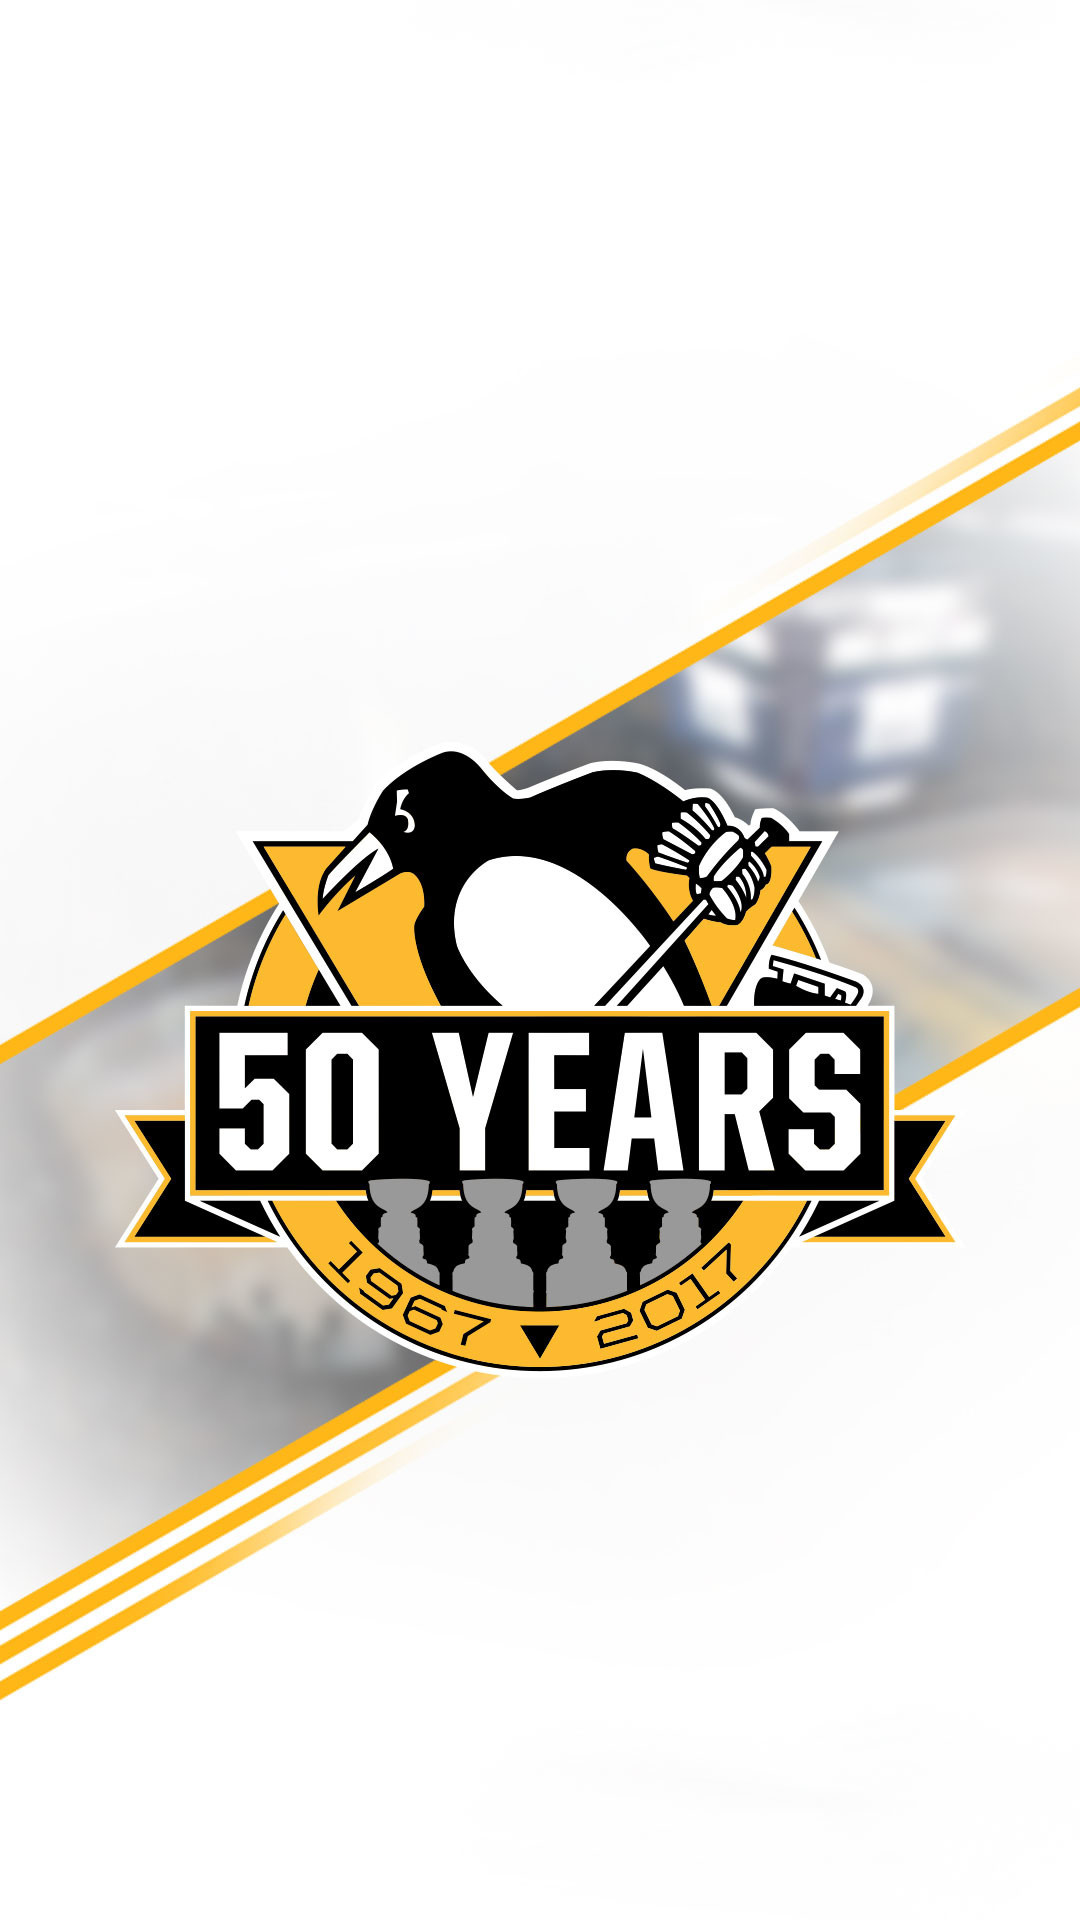 Pittsburgh Penguins: The Montreal Canadiens eliminated the team in the first round of the playoffs in 1998. 1080x1920 Full HD Wallpaper.